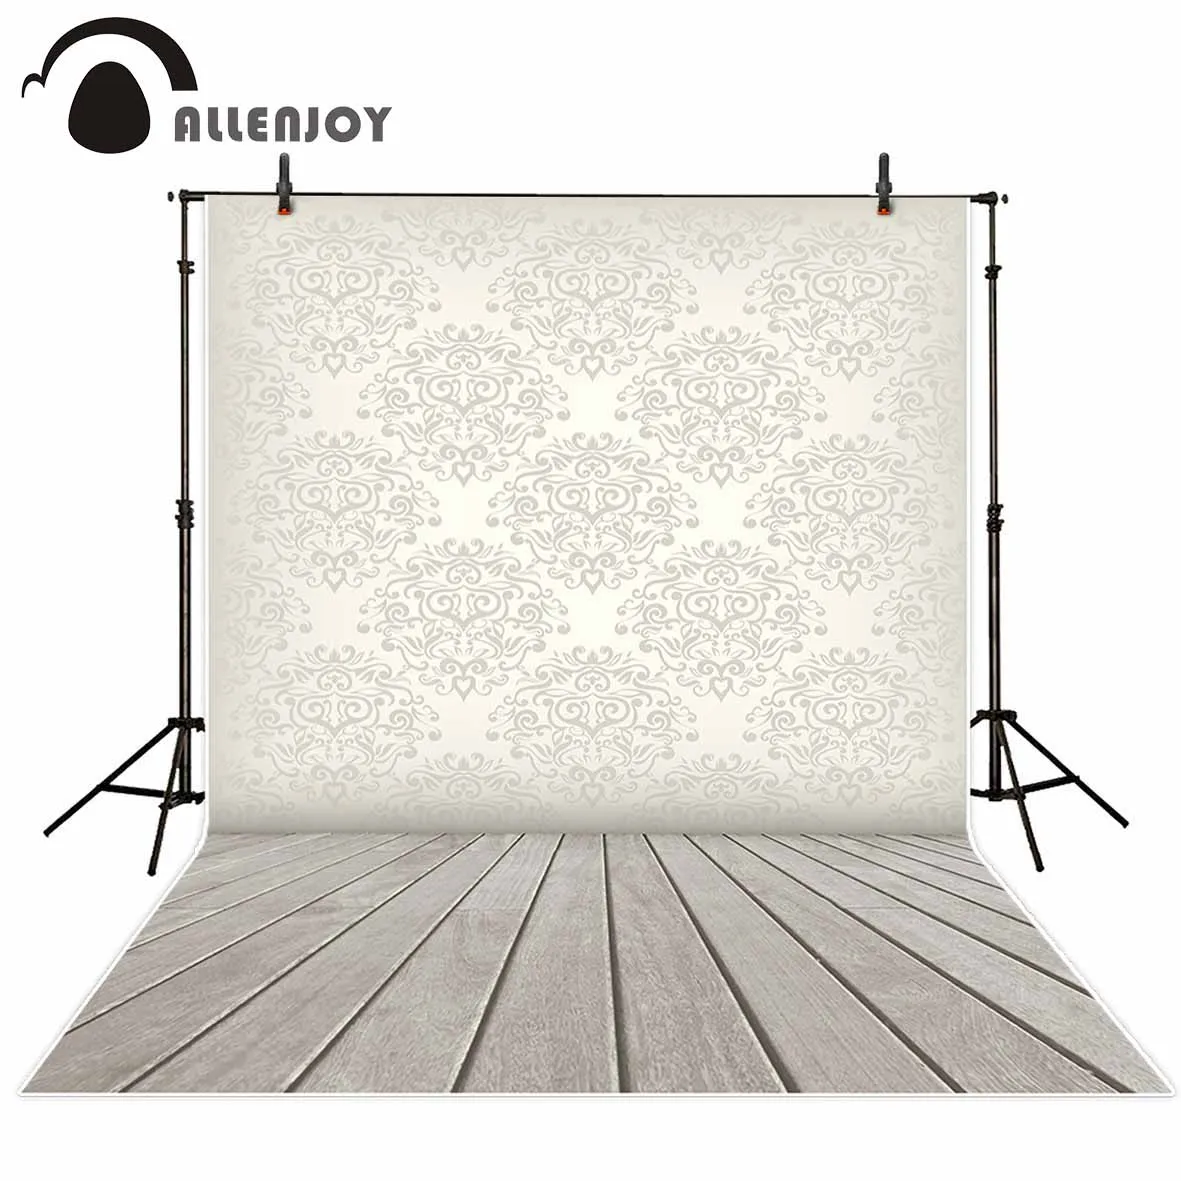 

Allenjoy photographic background Woody milky white pattern decorative wallpaper fantasy backdrop photography photocall props